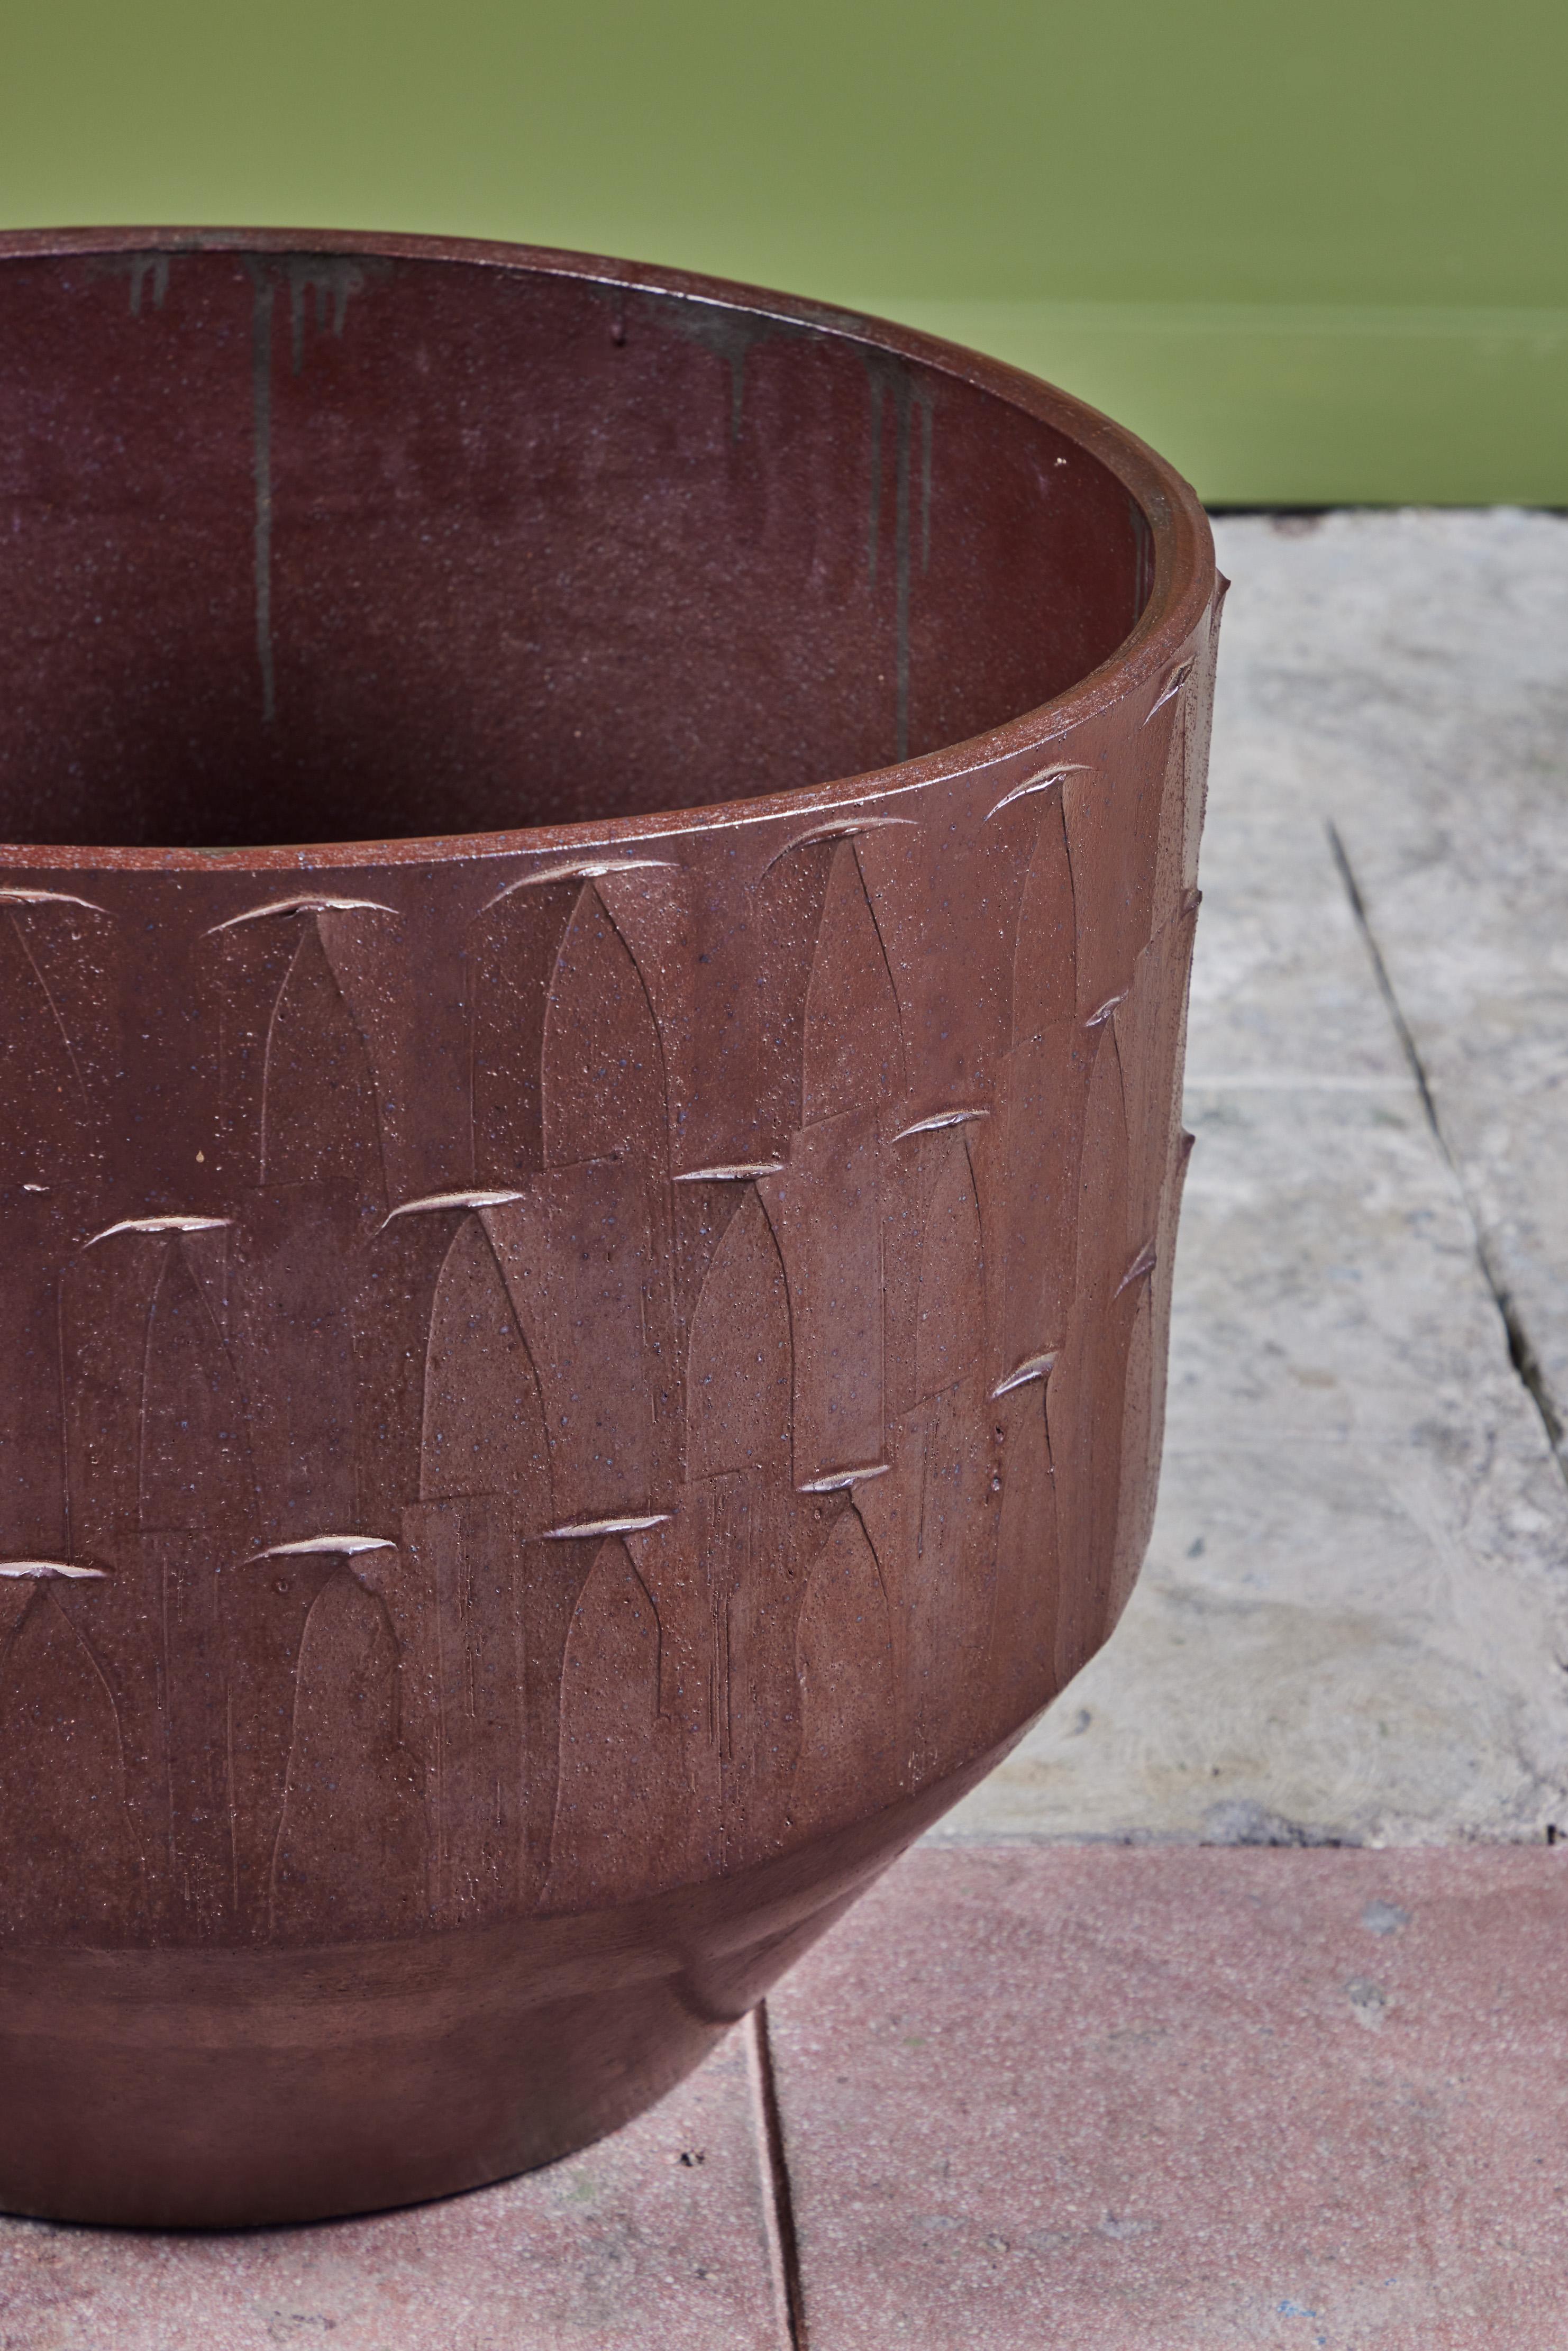 20th Century David Cressey Ribbed Plum Glazed Pro/Artisan Planter for Architectural Pottery